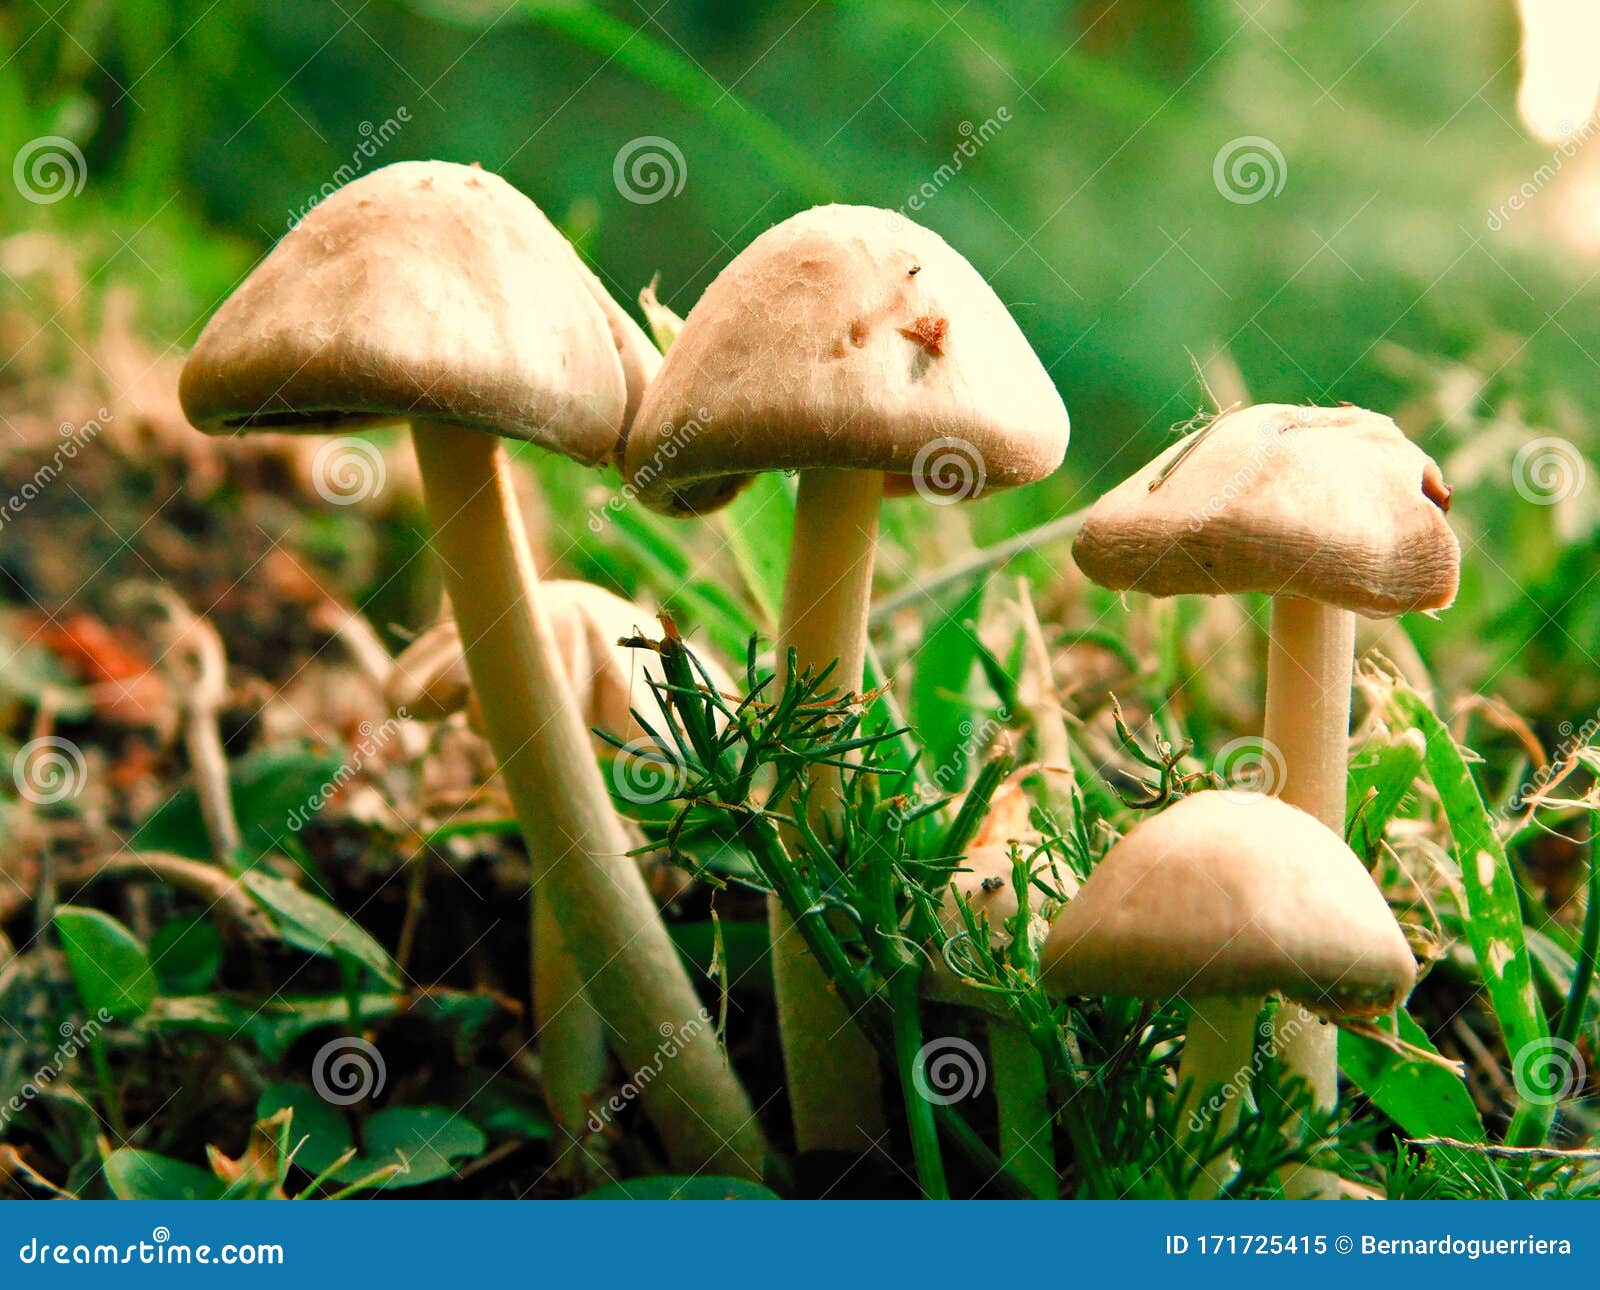 group of poisonous mushrooms